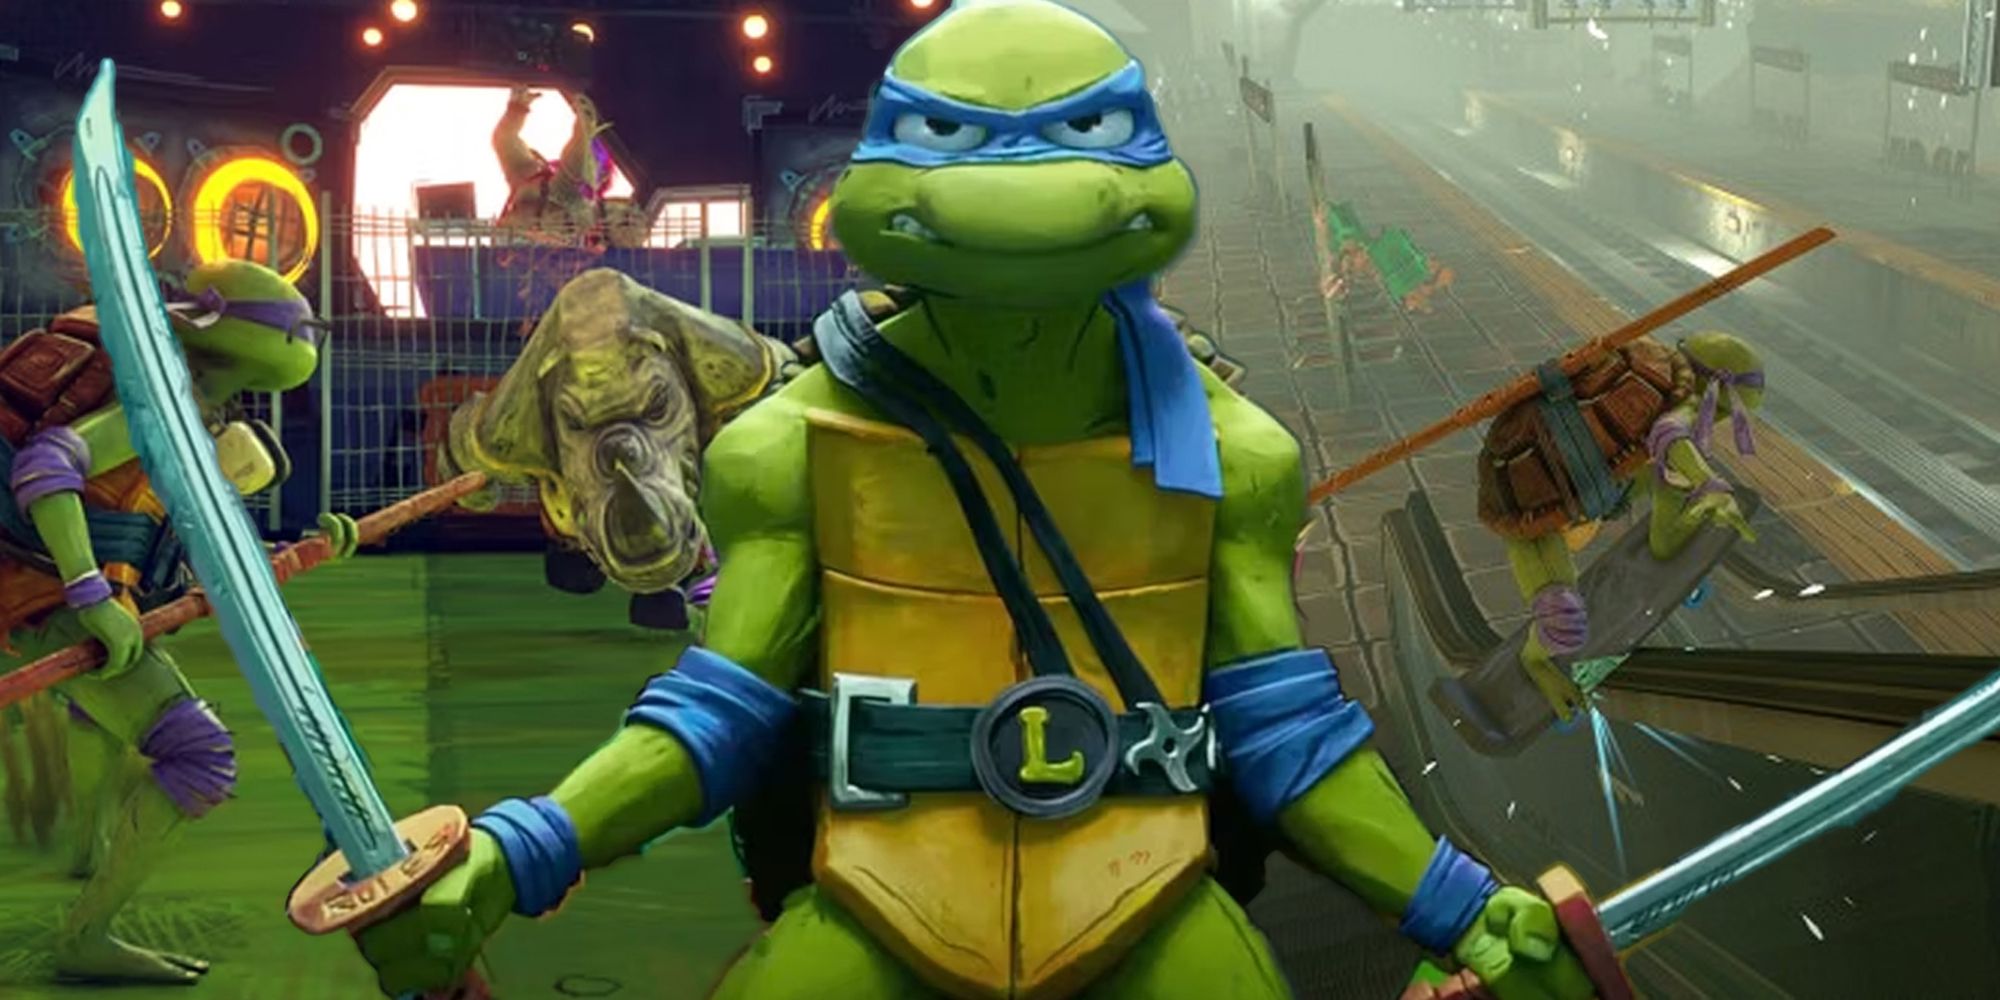 Leonardo with his swords drawn in the TMNT Mutant Mayhem movie, with Donatello grinding on a subway escalator and fighting Rocksteady behind him